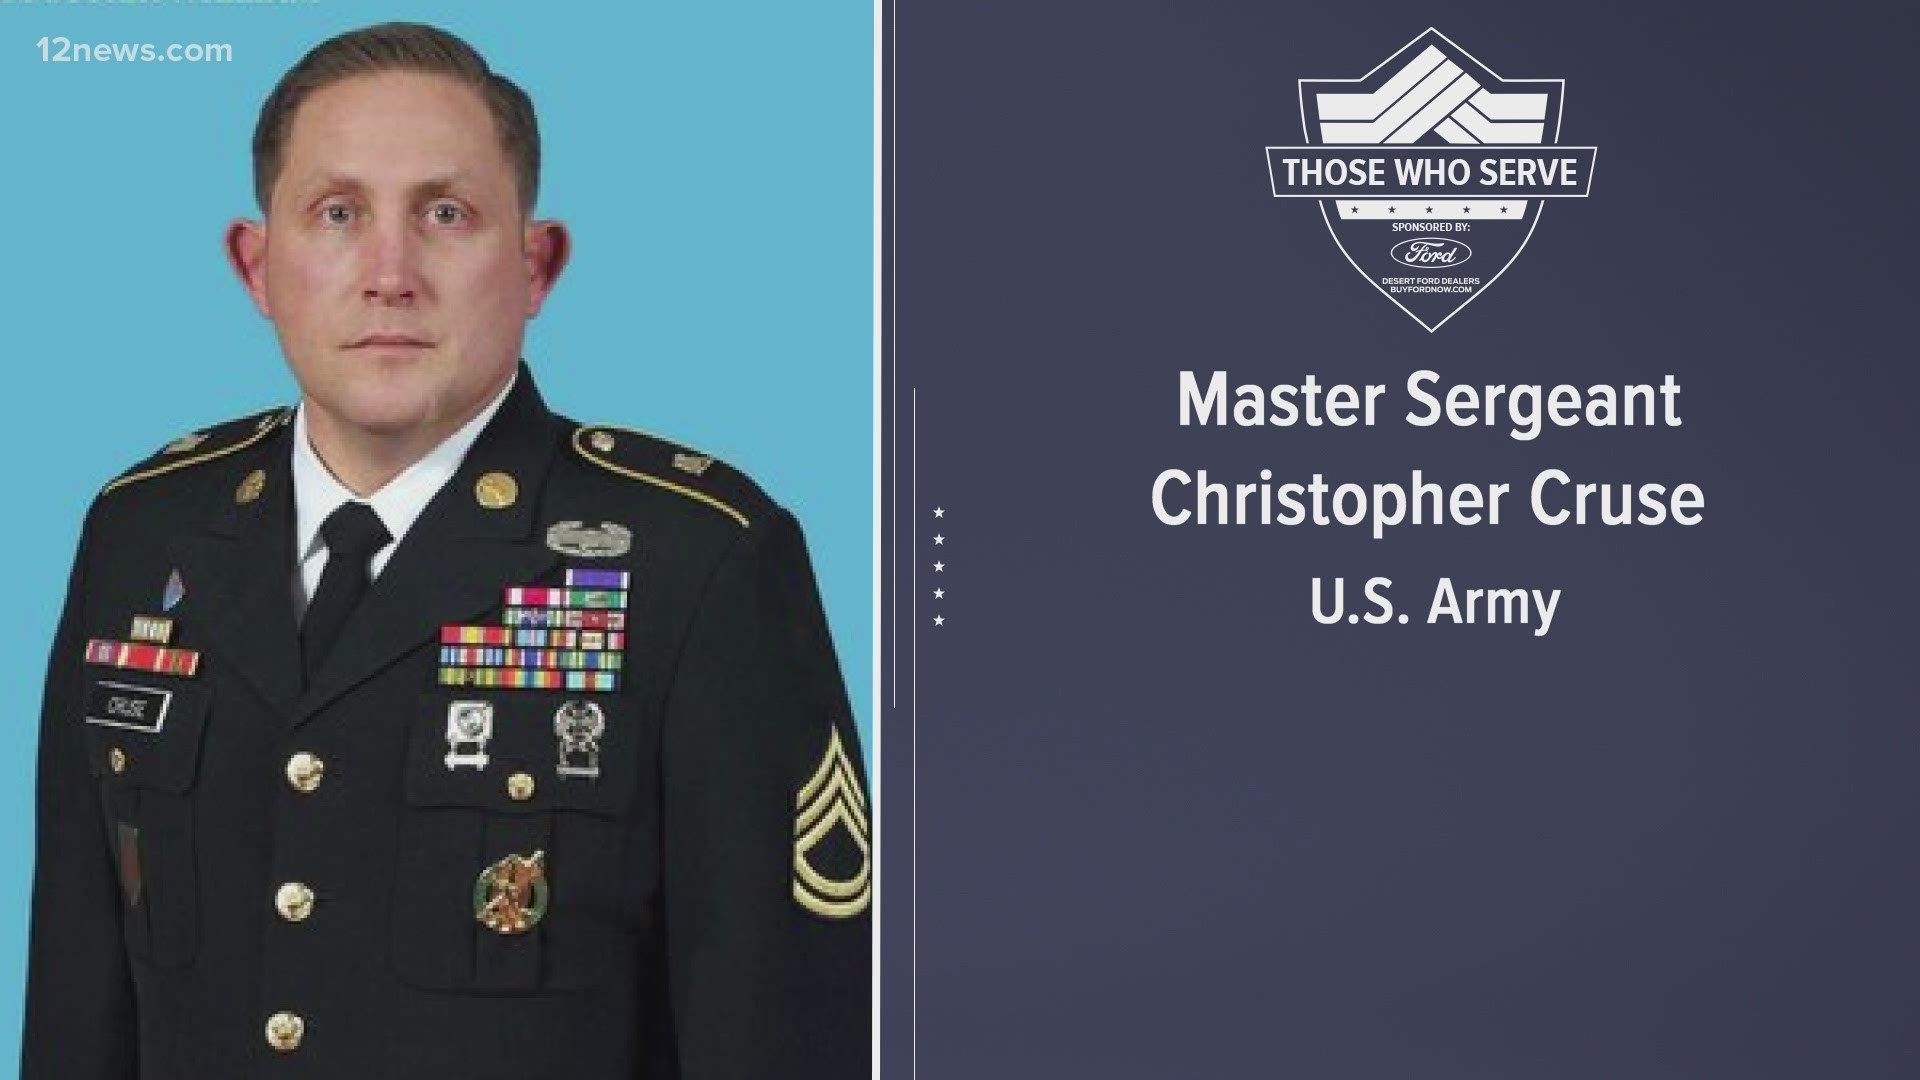 We are saluting Those Who Serve. We are shinning the spotlight on Master Sgt. Christopher Cruse serving in the U.S. Army and Army Specialist Matt Altman.